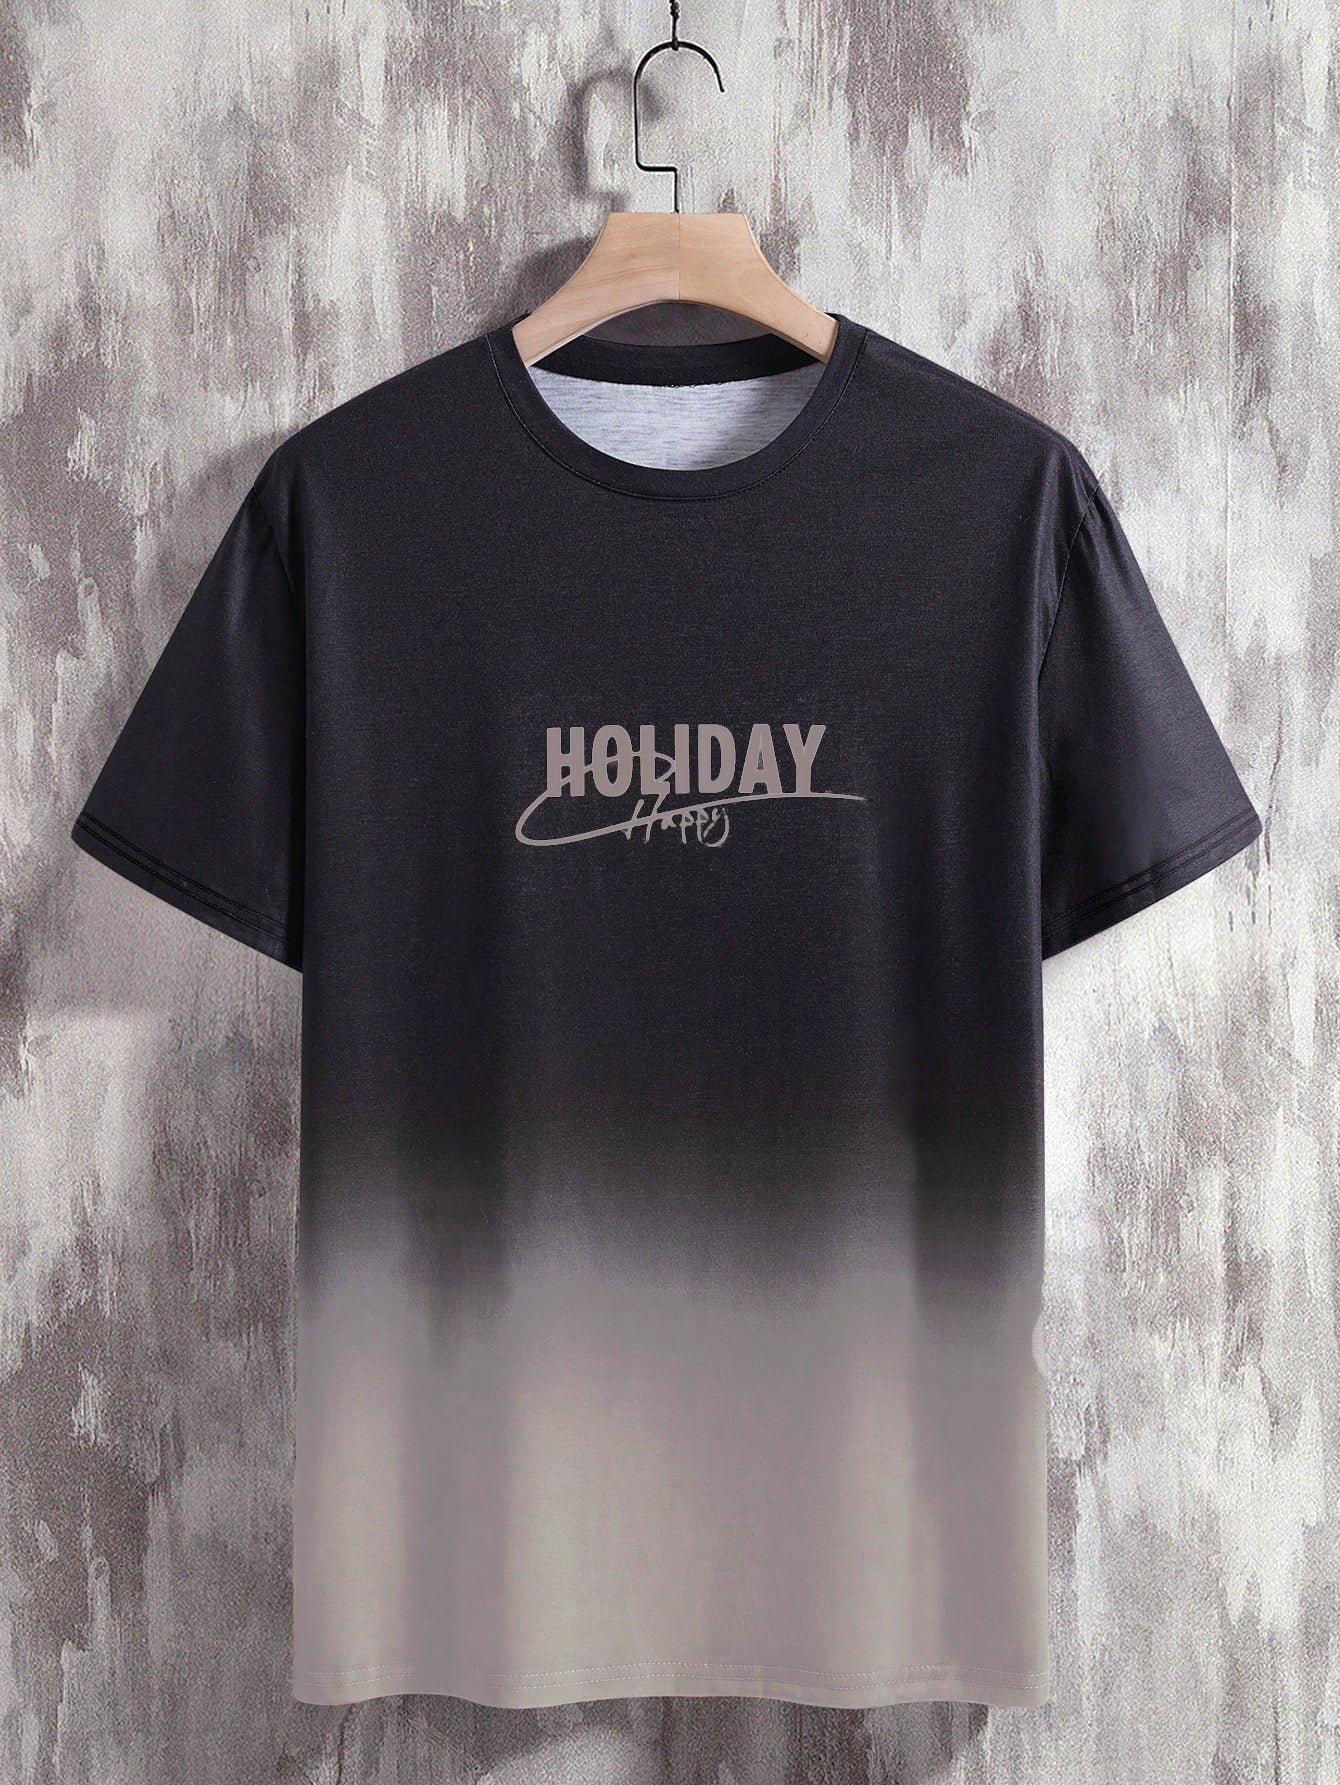 Manfinity Homme Men Letter Graphic Ombre Tee